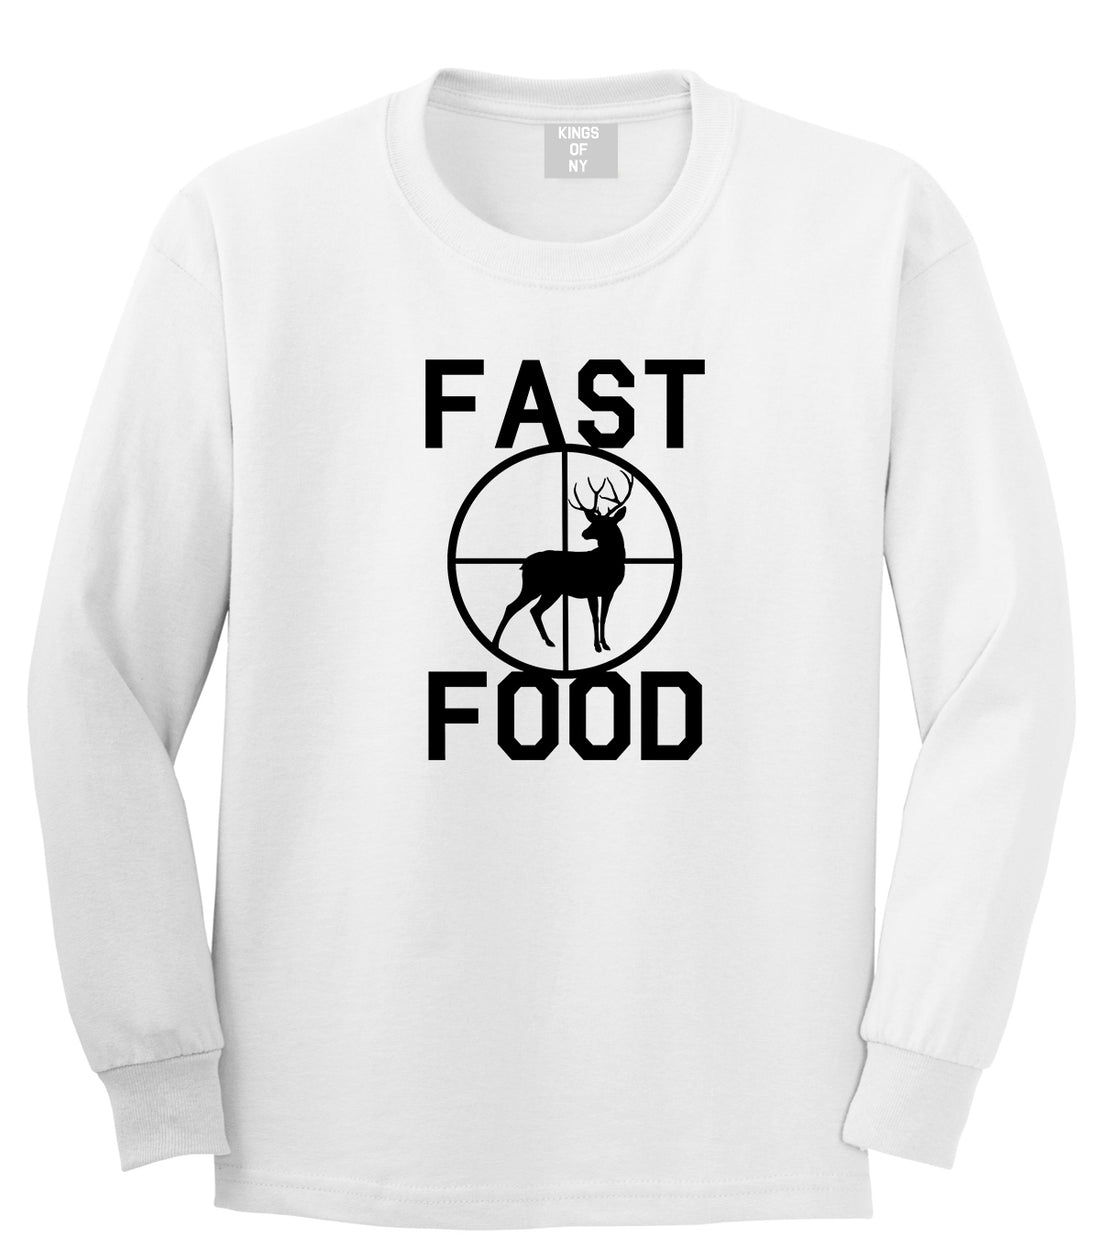 Fast Food Deer Hunting Mens White Long Sleeve T-Shirt by KINGS OF NY